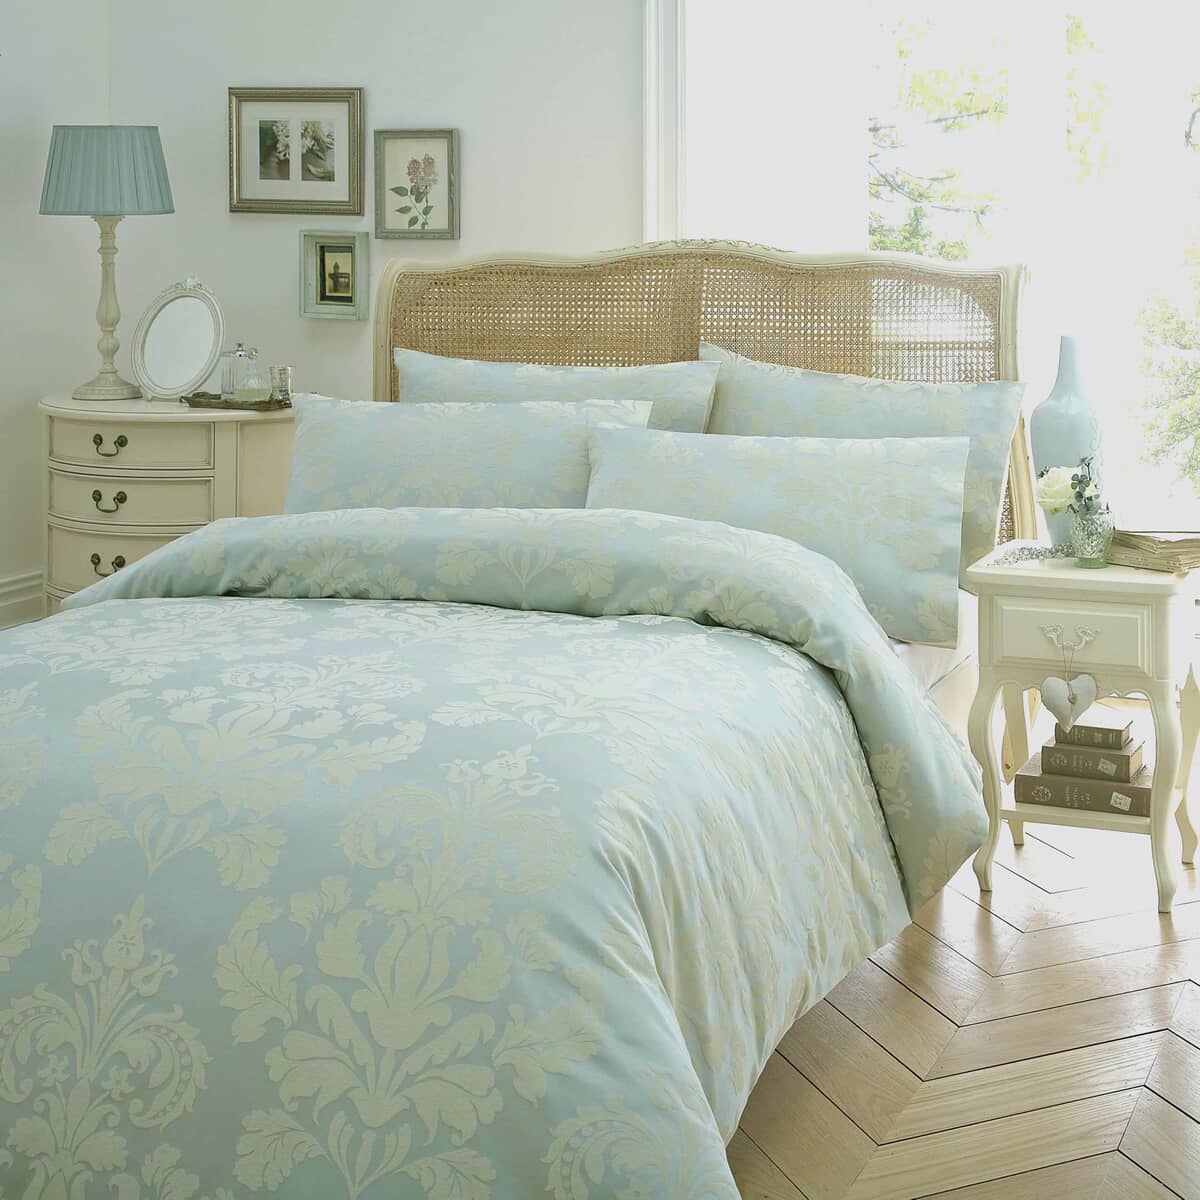 Duck Egg Blue And Cream Bedding Home Decorating Ideas